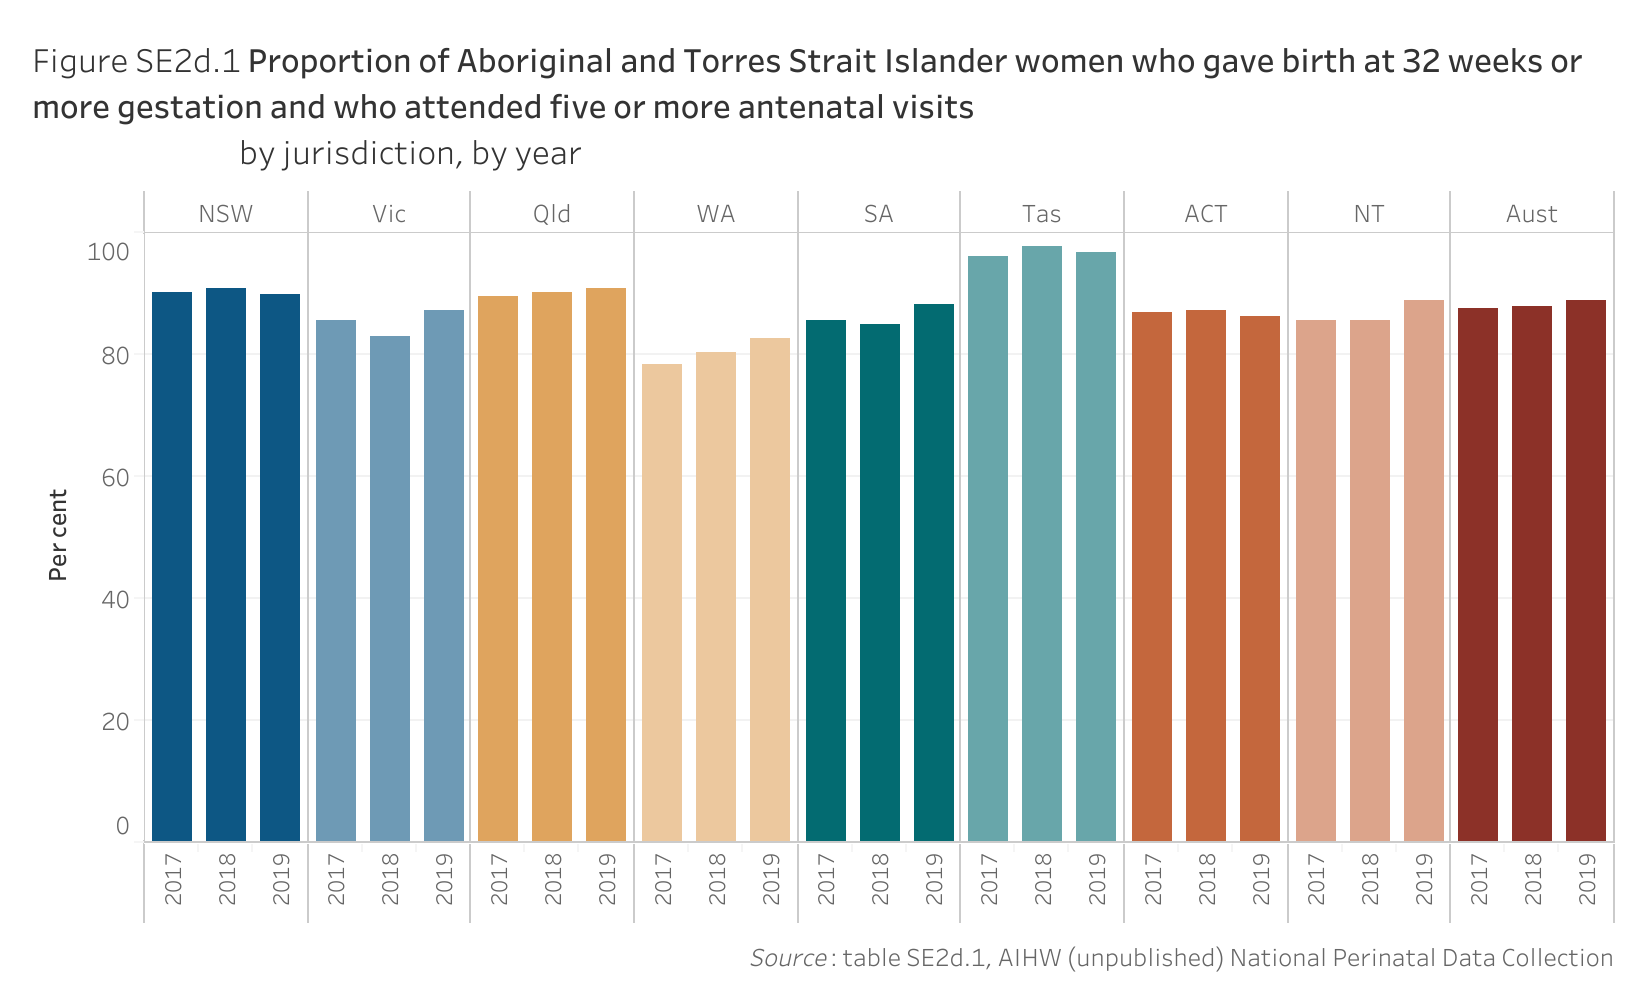 Figure SE2d.1. Bar chart showing the proportion of Aboriginal and Torres Strait Islander women who gave birth at 32 weeks or more gestation and who attended five or more antenatal visits, by jurisdiction and by year. Data table of figure SE2d.1 is below.